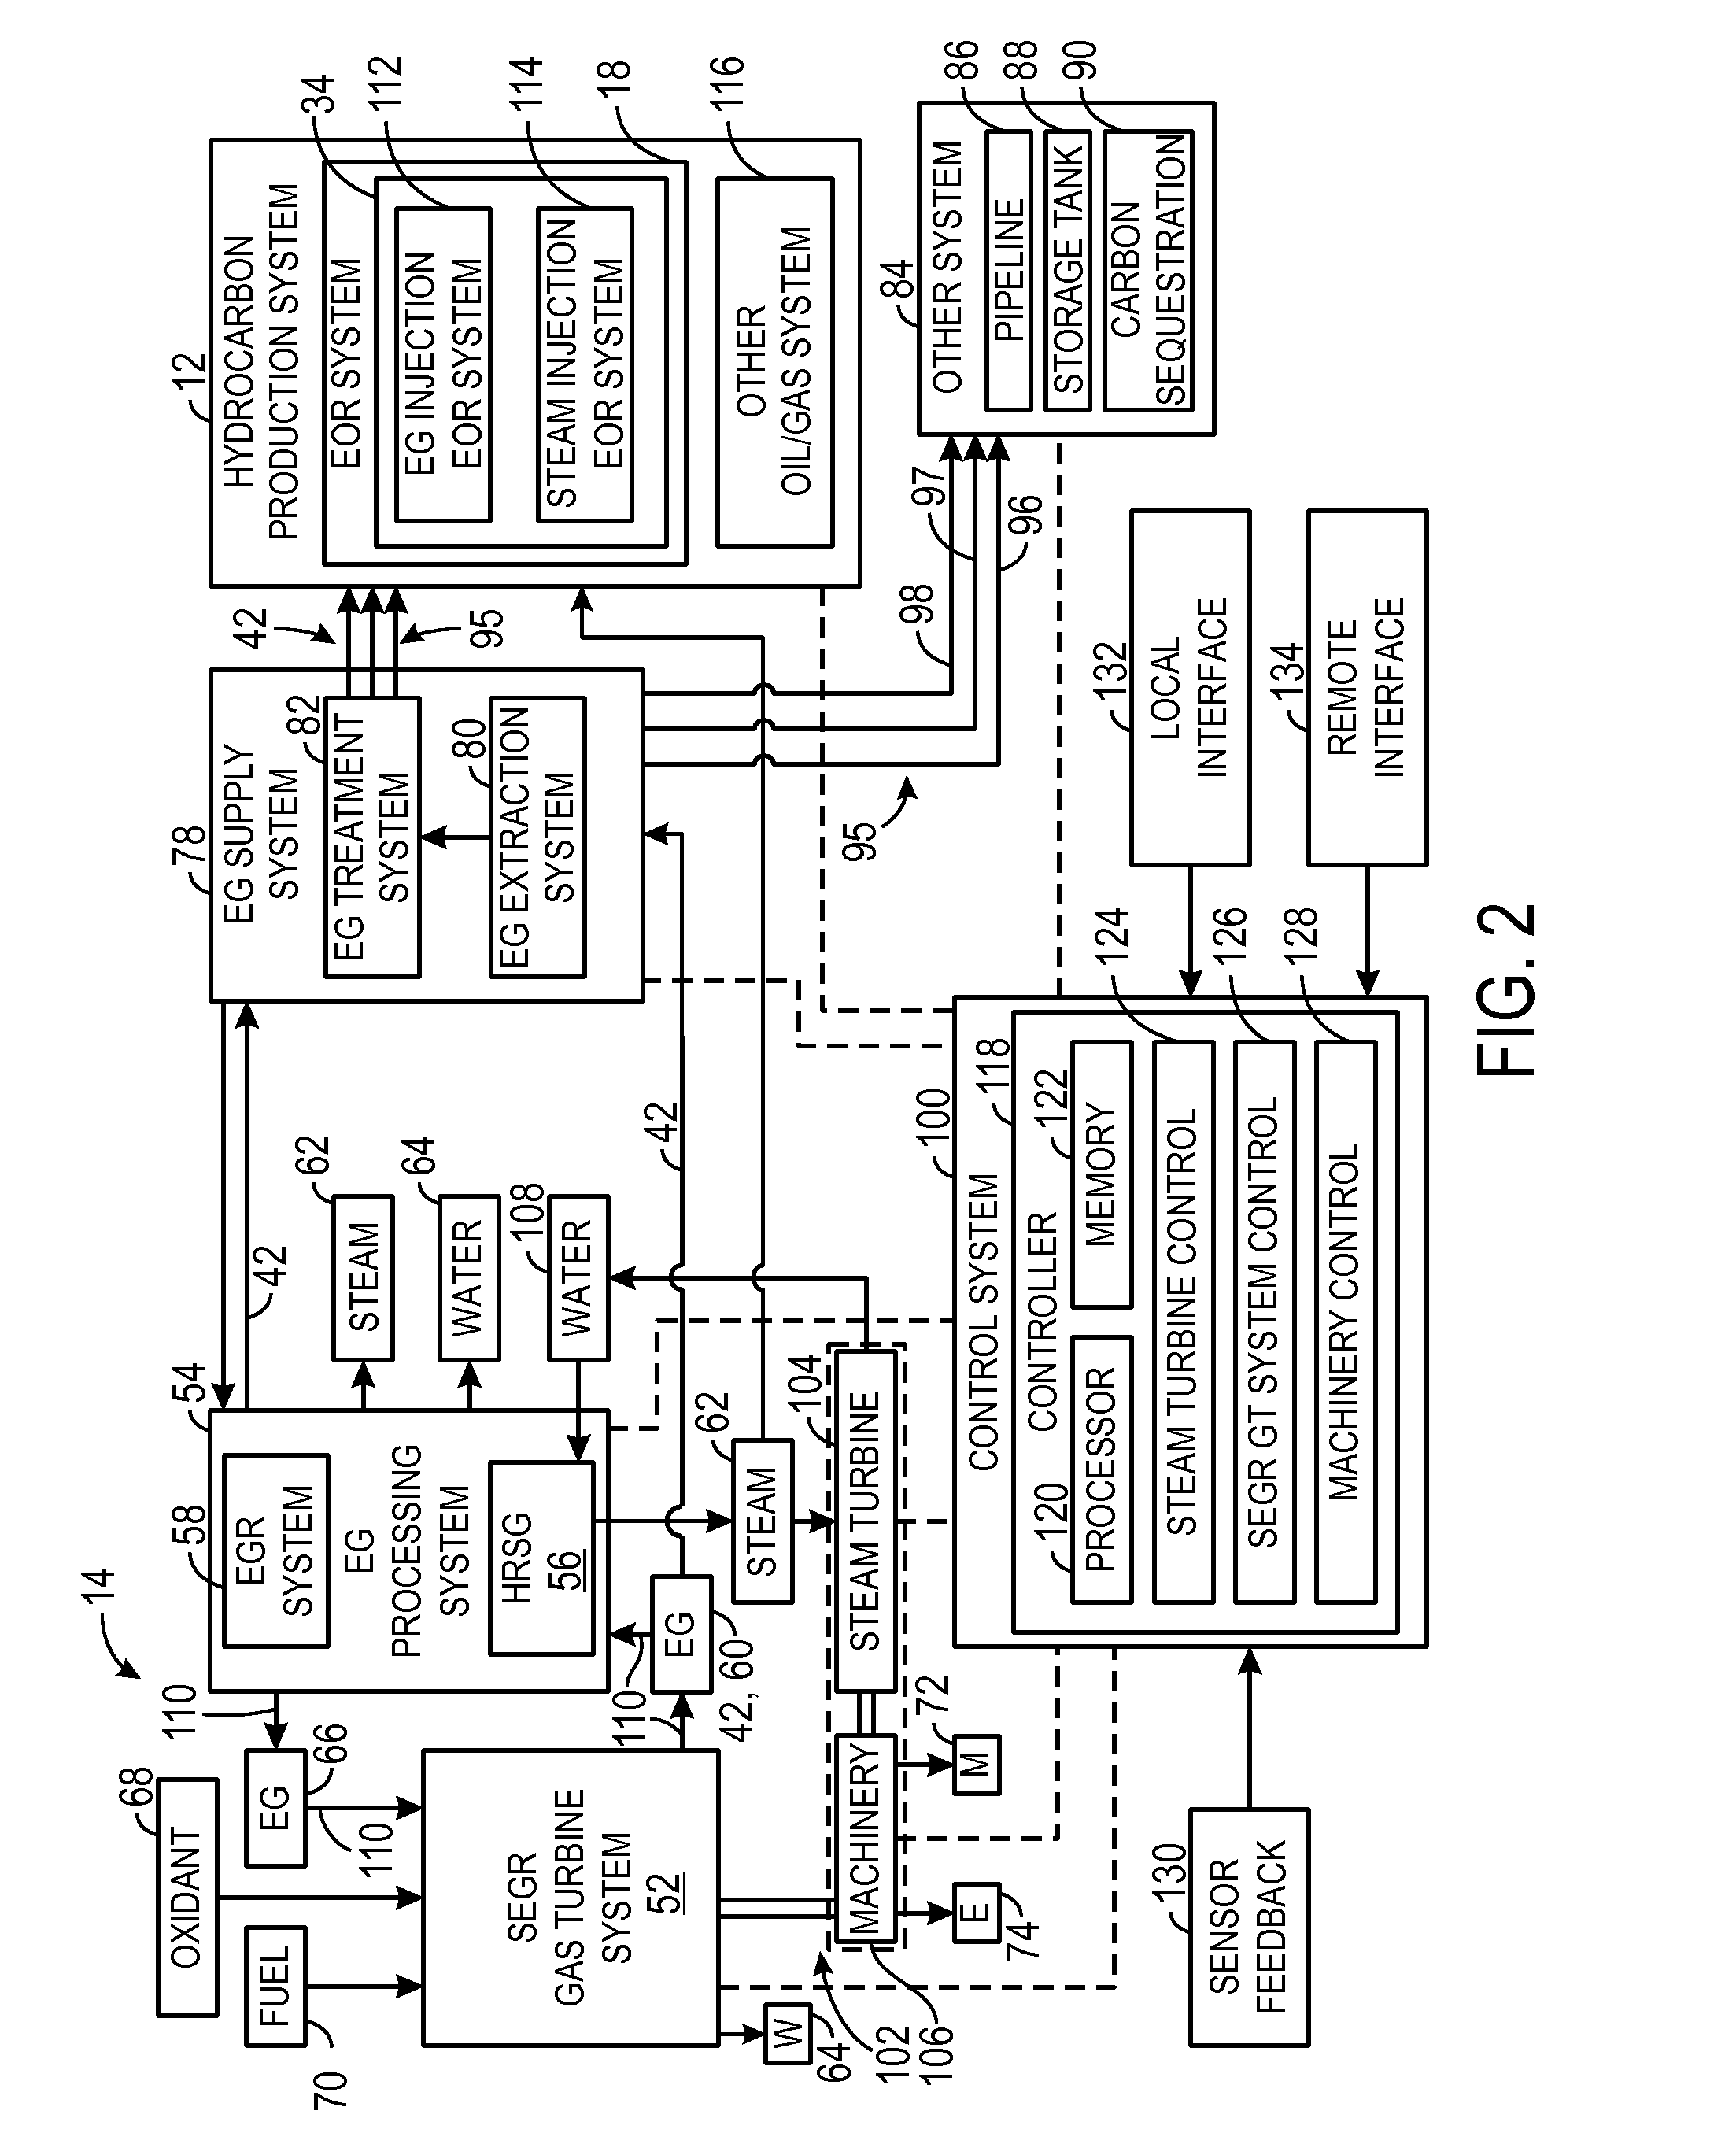 System and method of controlling combustion and emissions in gas turbine engine with exhaust gas recirculation